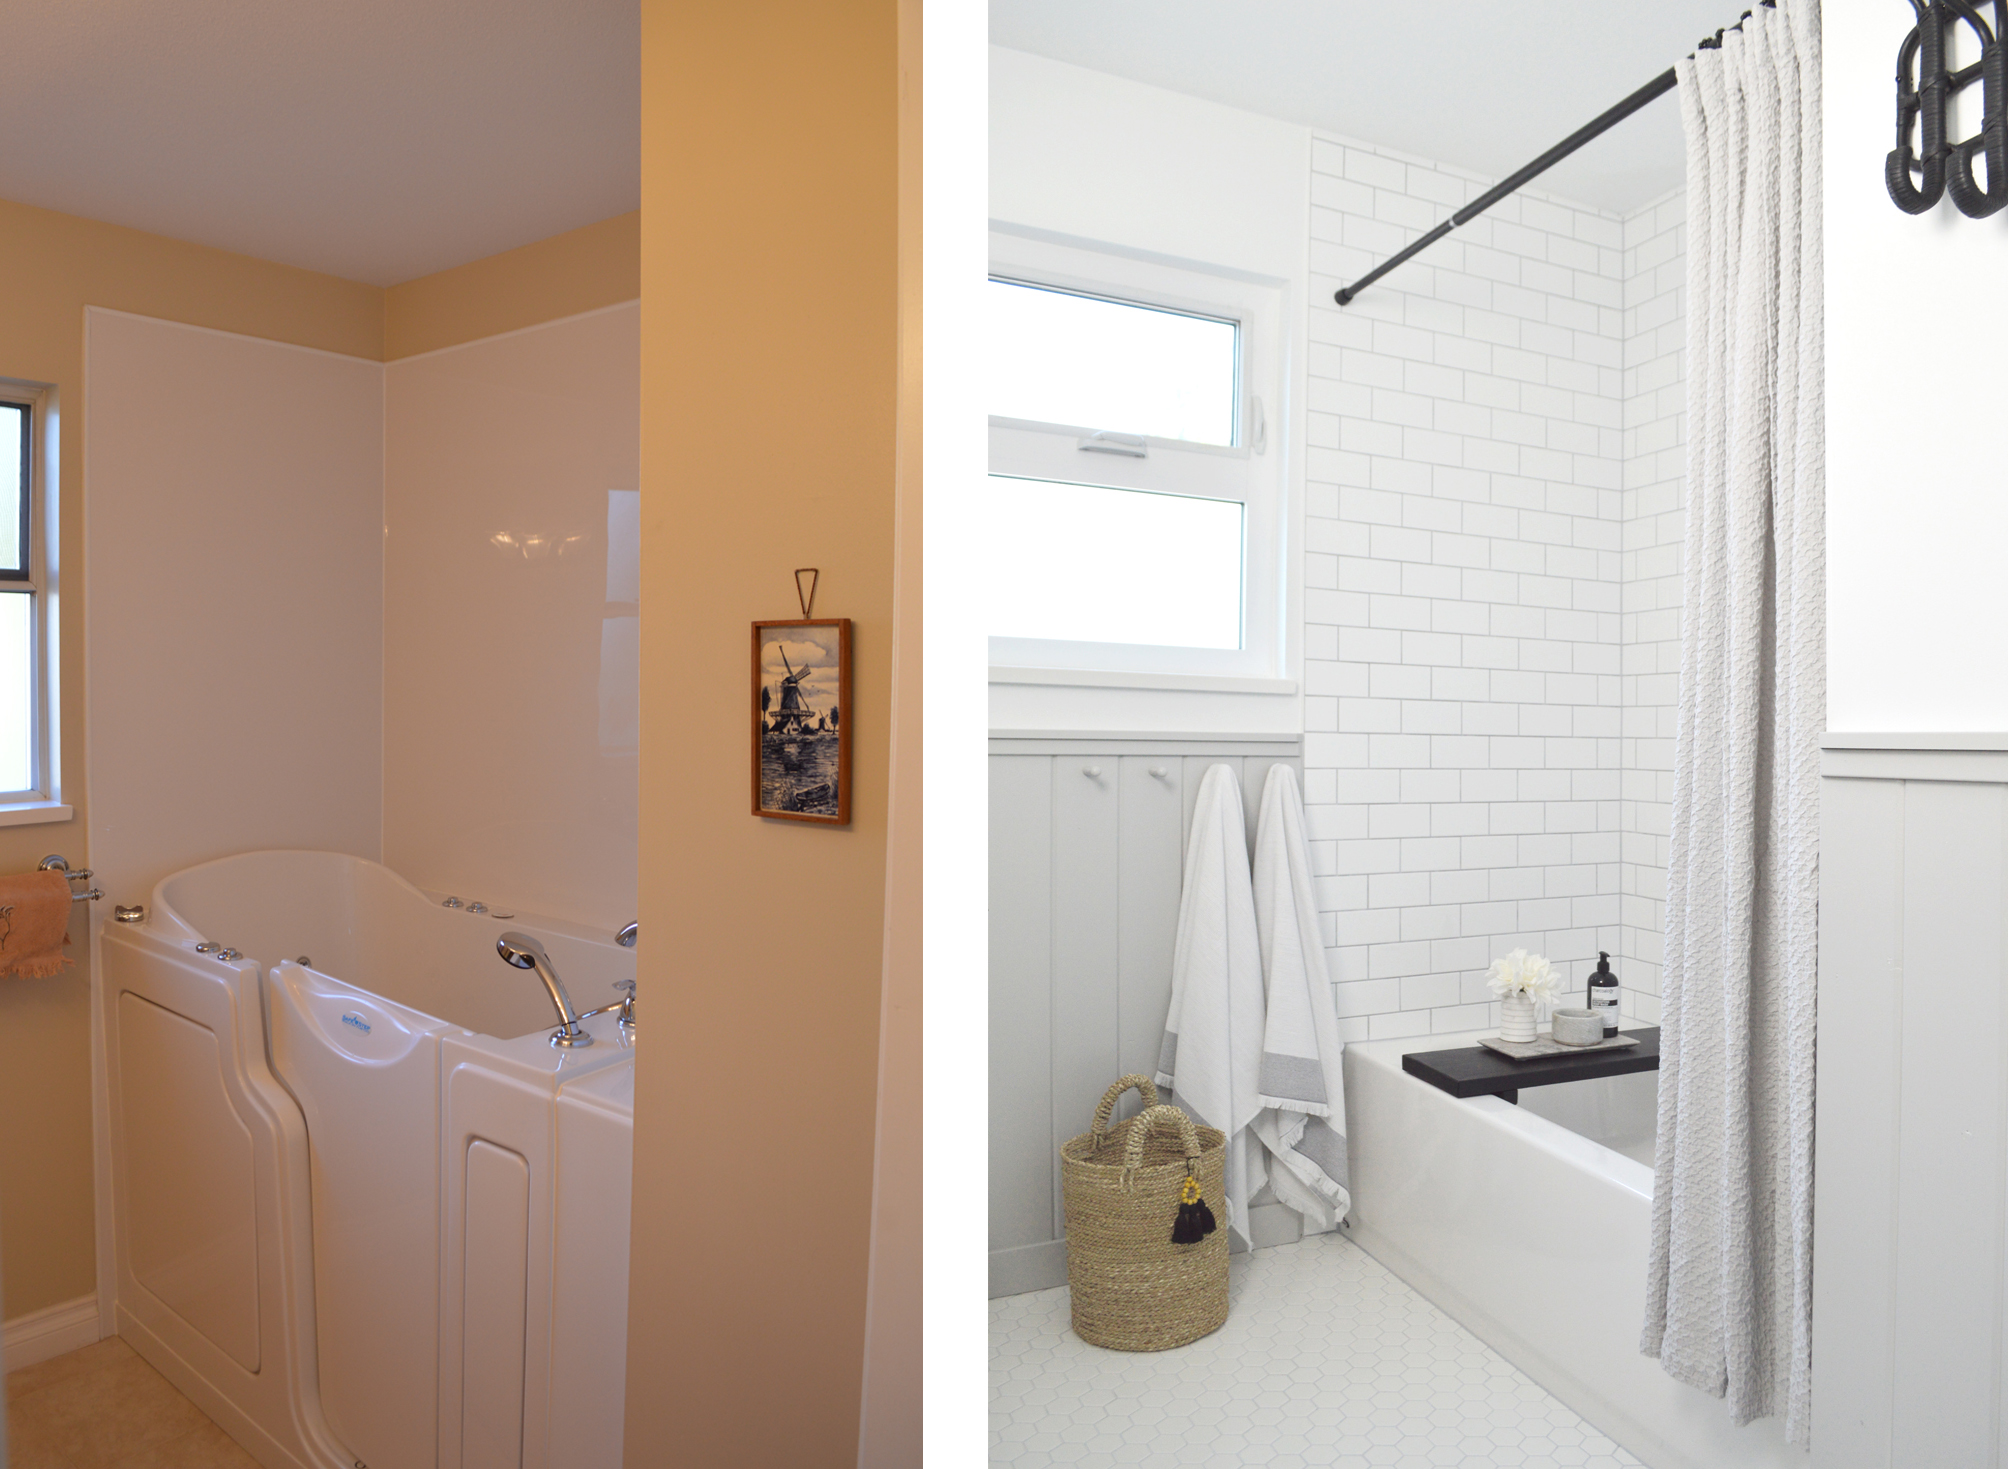 Diy Guest Bathroom Renovation For Under 2 000 Before After Photos And Cost Breakdown Ich Designer